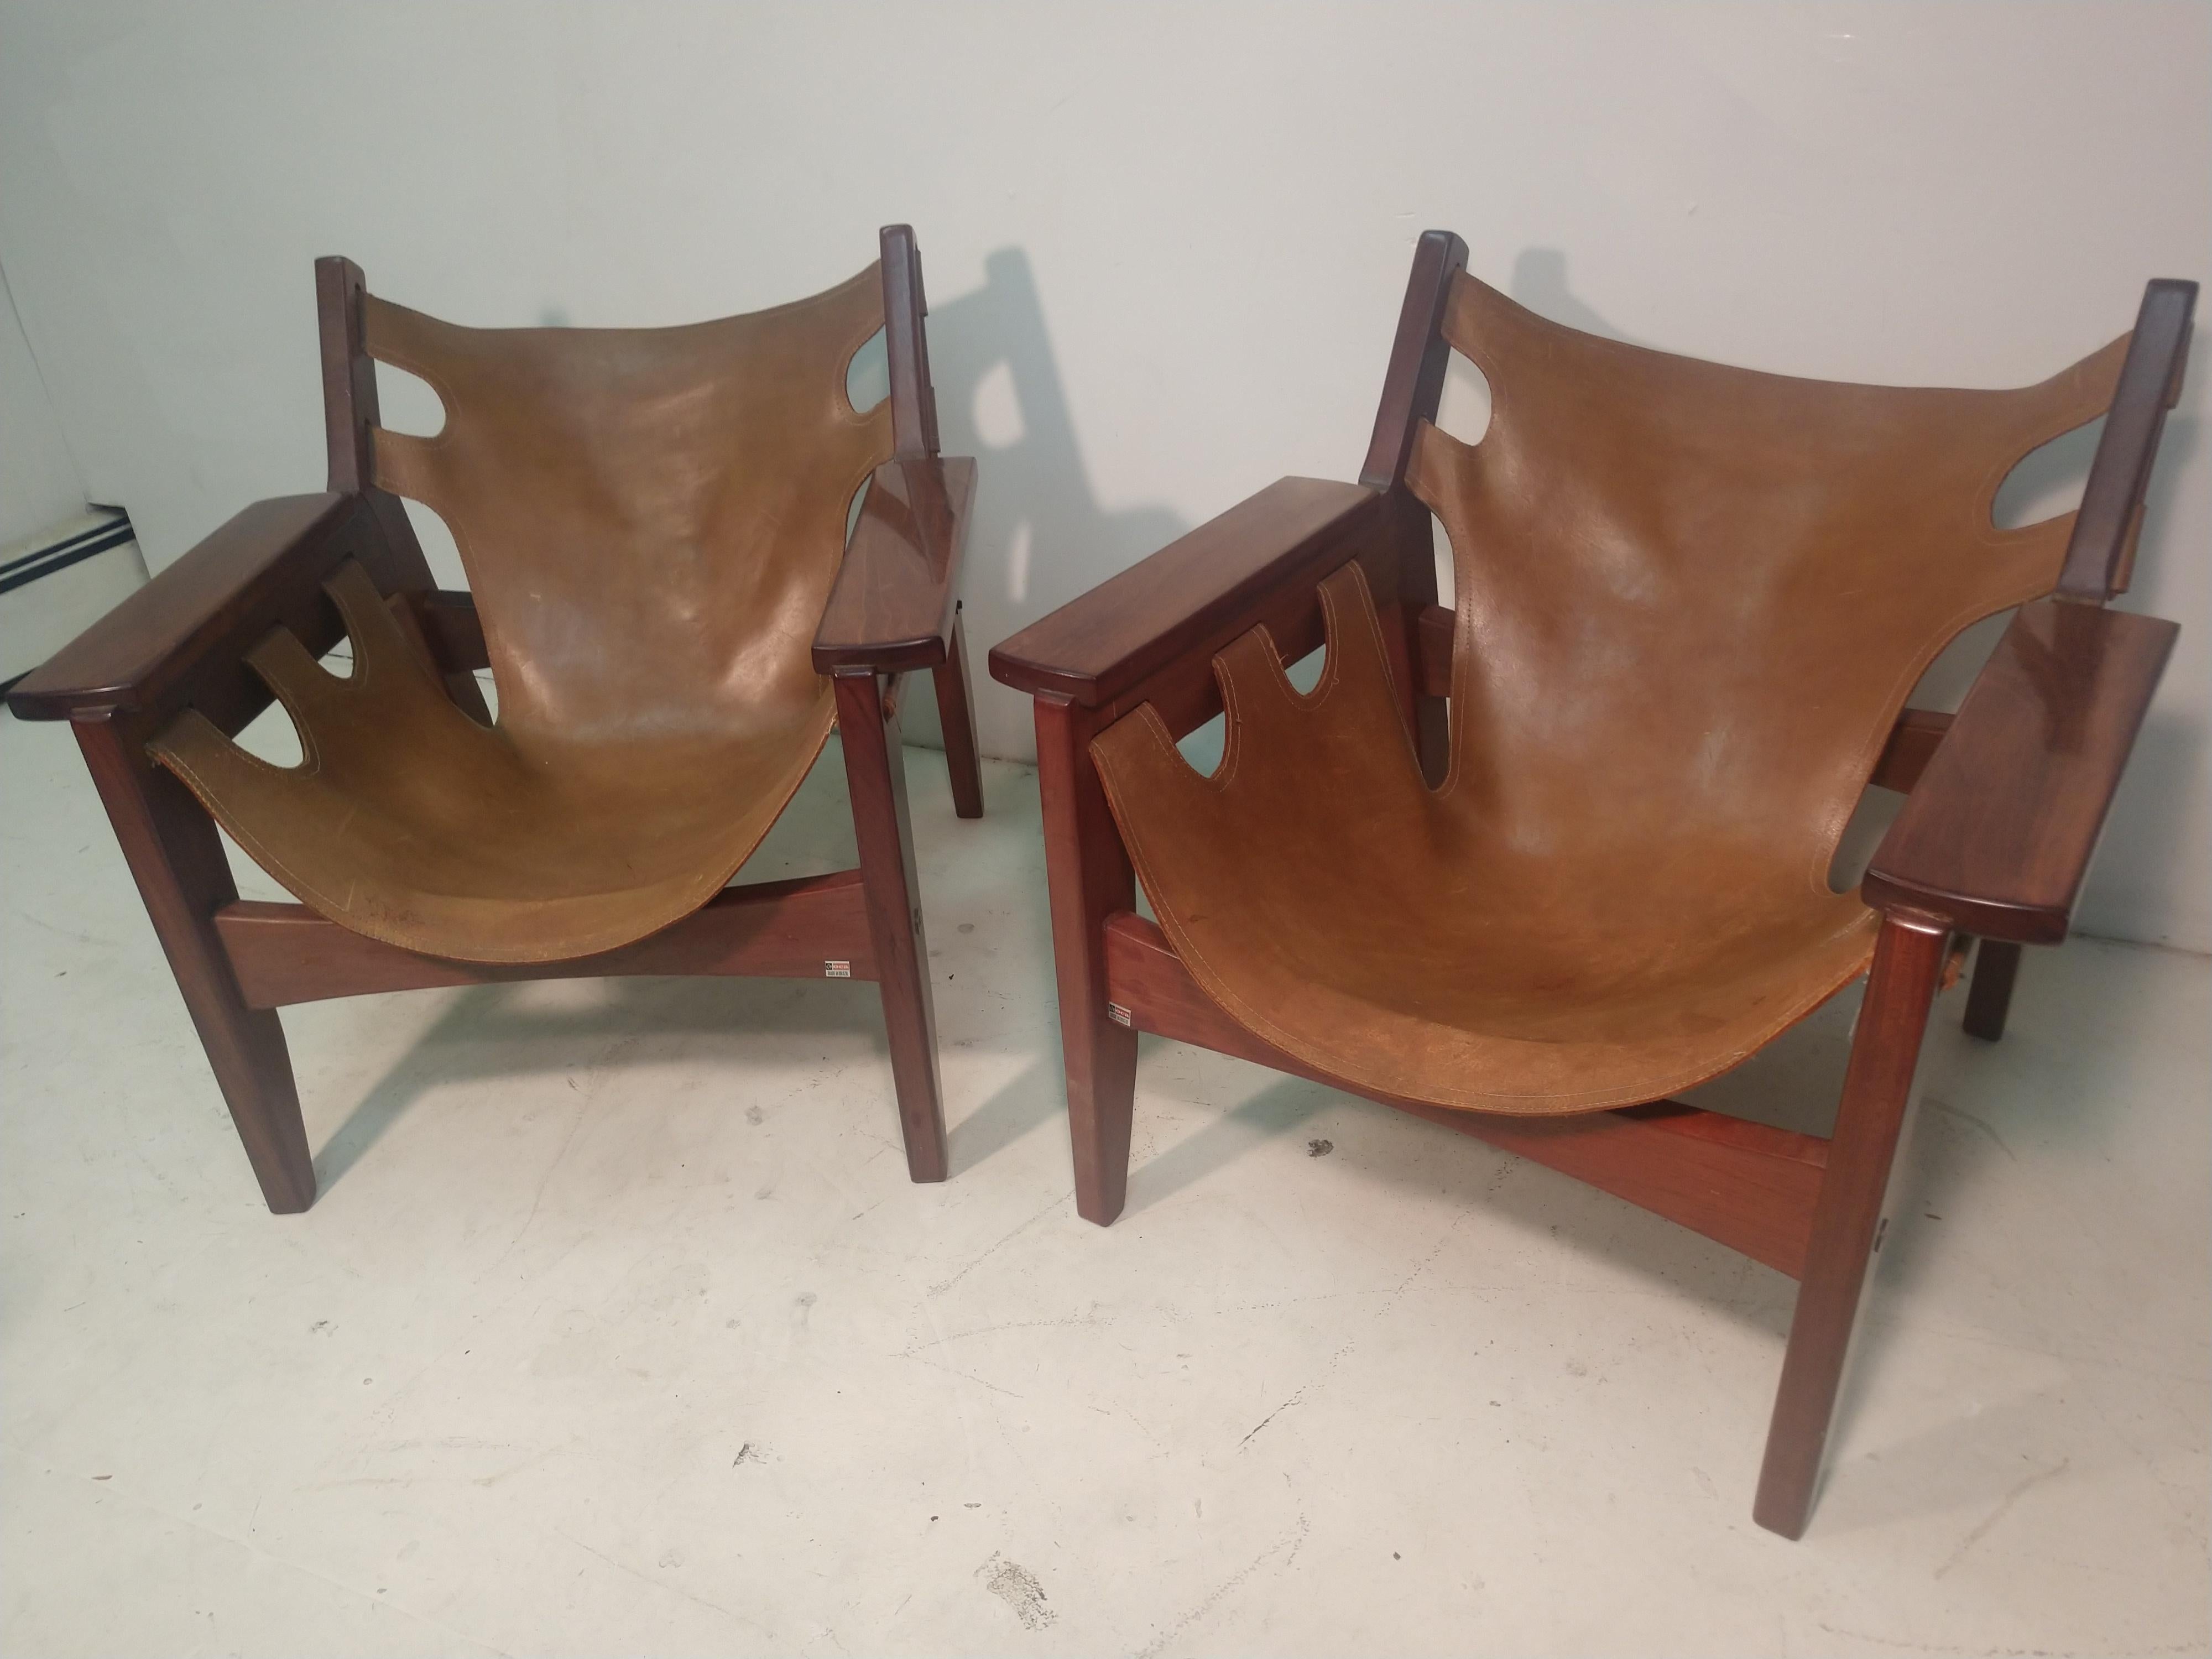 Pair of Mid-Century Modern Rosewood & Leather Lounge Chairs by Sergio Rodrigues 8